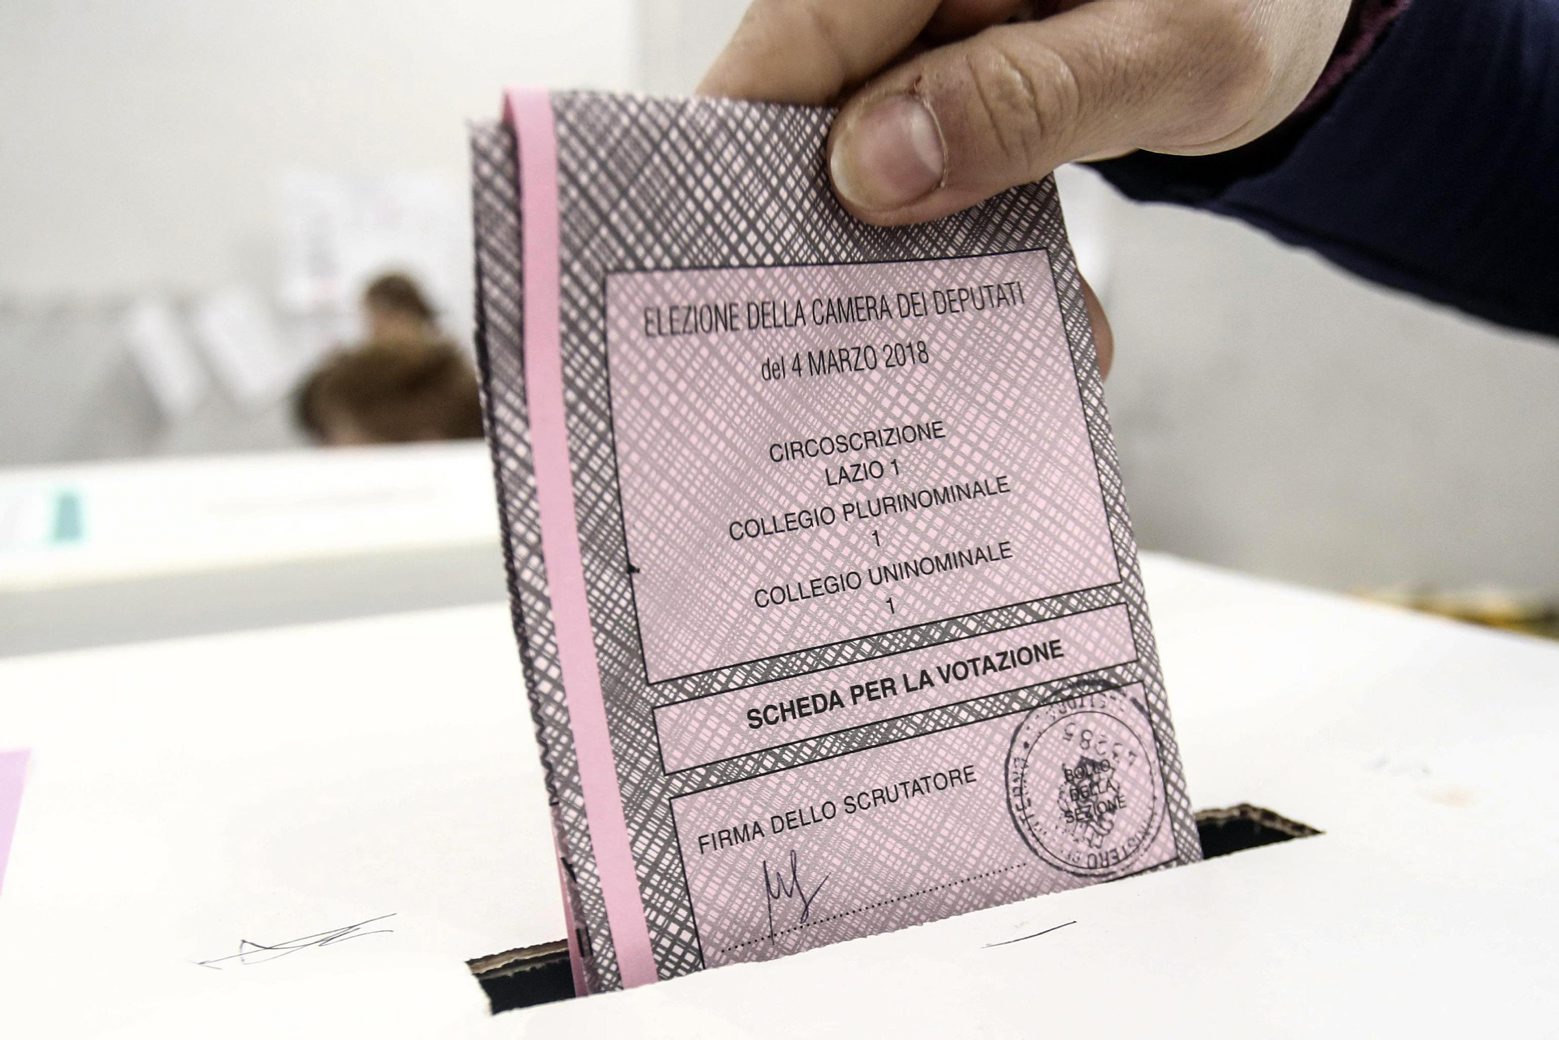 A person cast his ballot at a polling station in Rome, Sunday, March 4, 2018. More than 46 million Italians were voting Sunday in a general election that is being closely watched to determine if Italy would succumb to the populist, anti-establishment and far-right sentiment that has swept through much of Europe in recent years. (Giuseppe Lami/ANSA via AP) Italy Elections